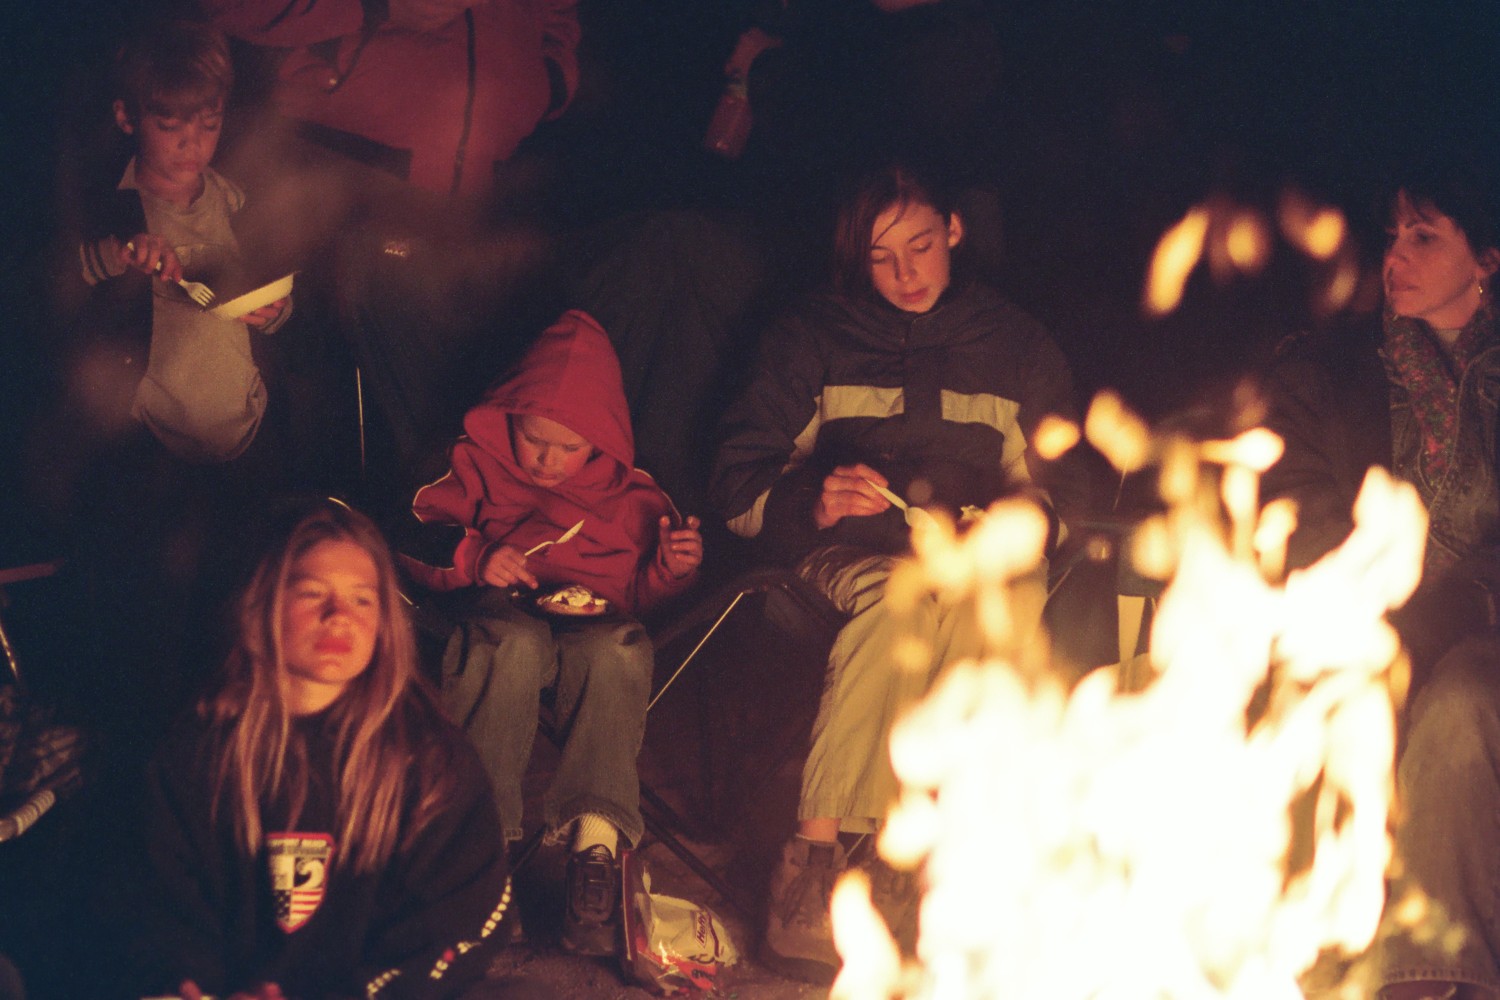 The campfire kids